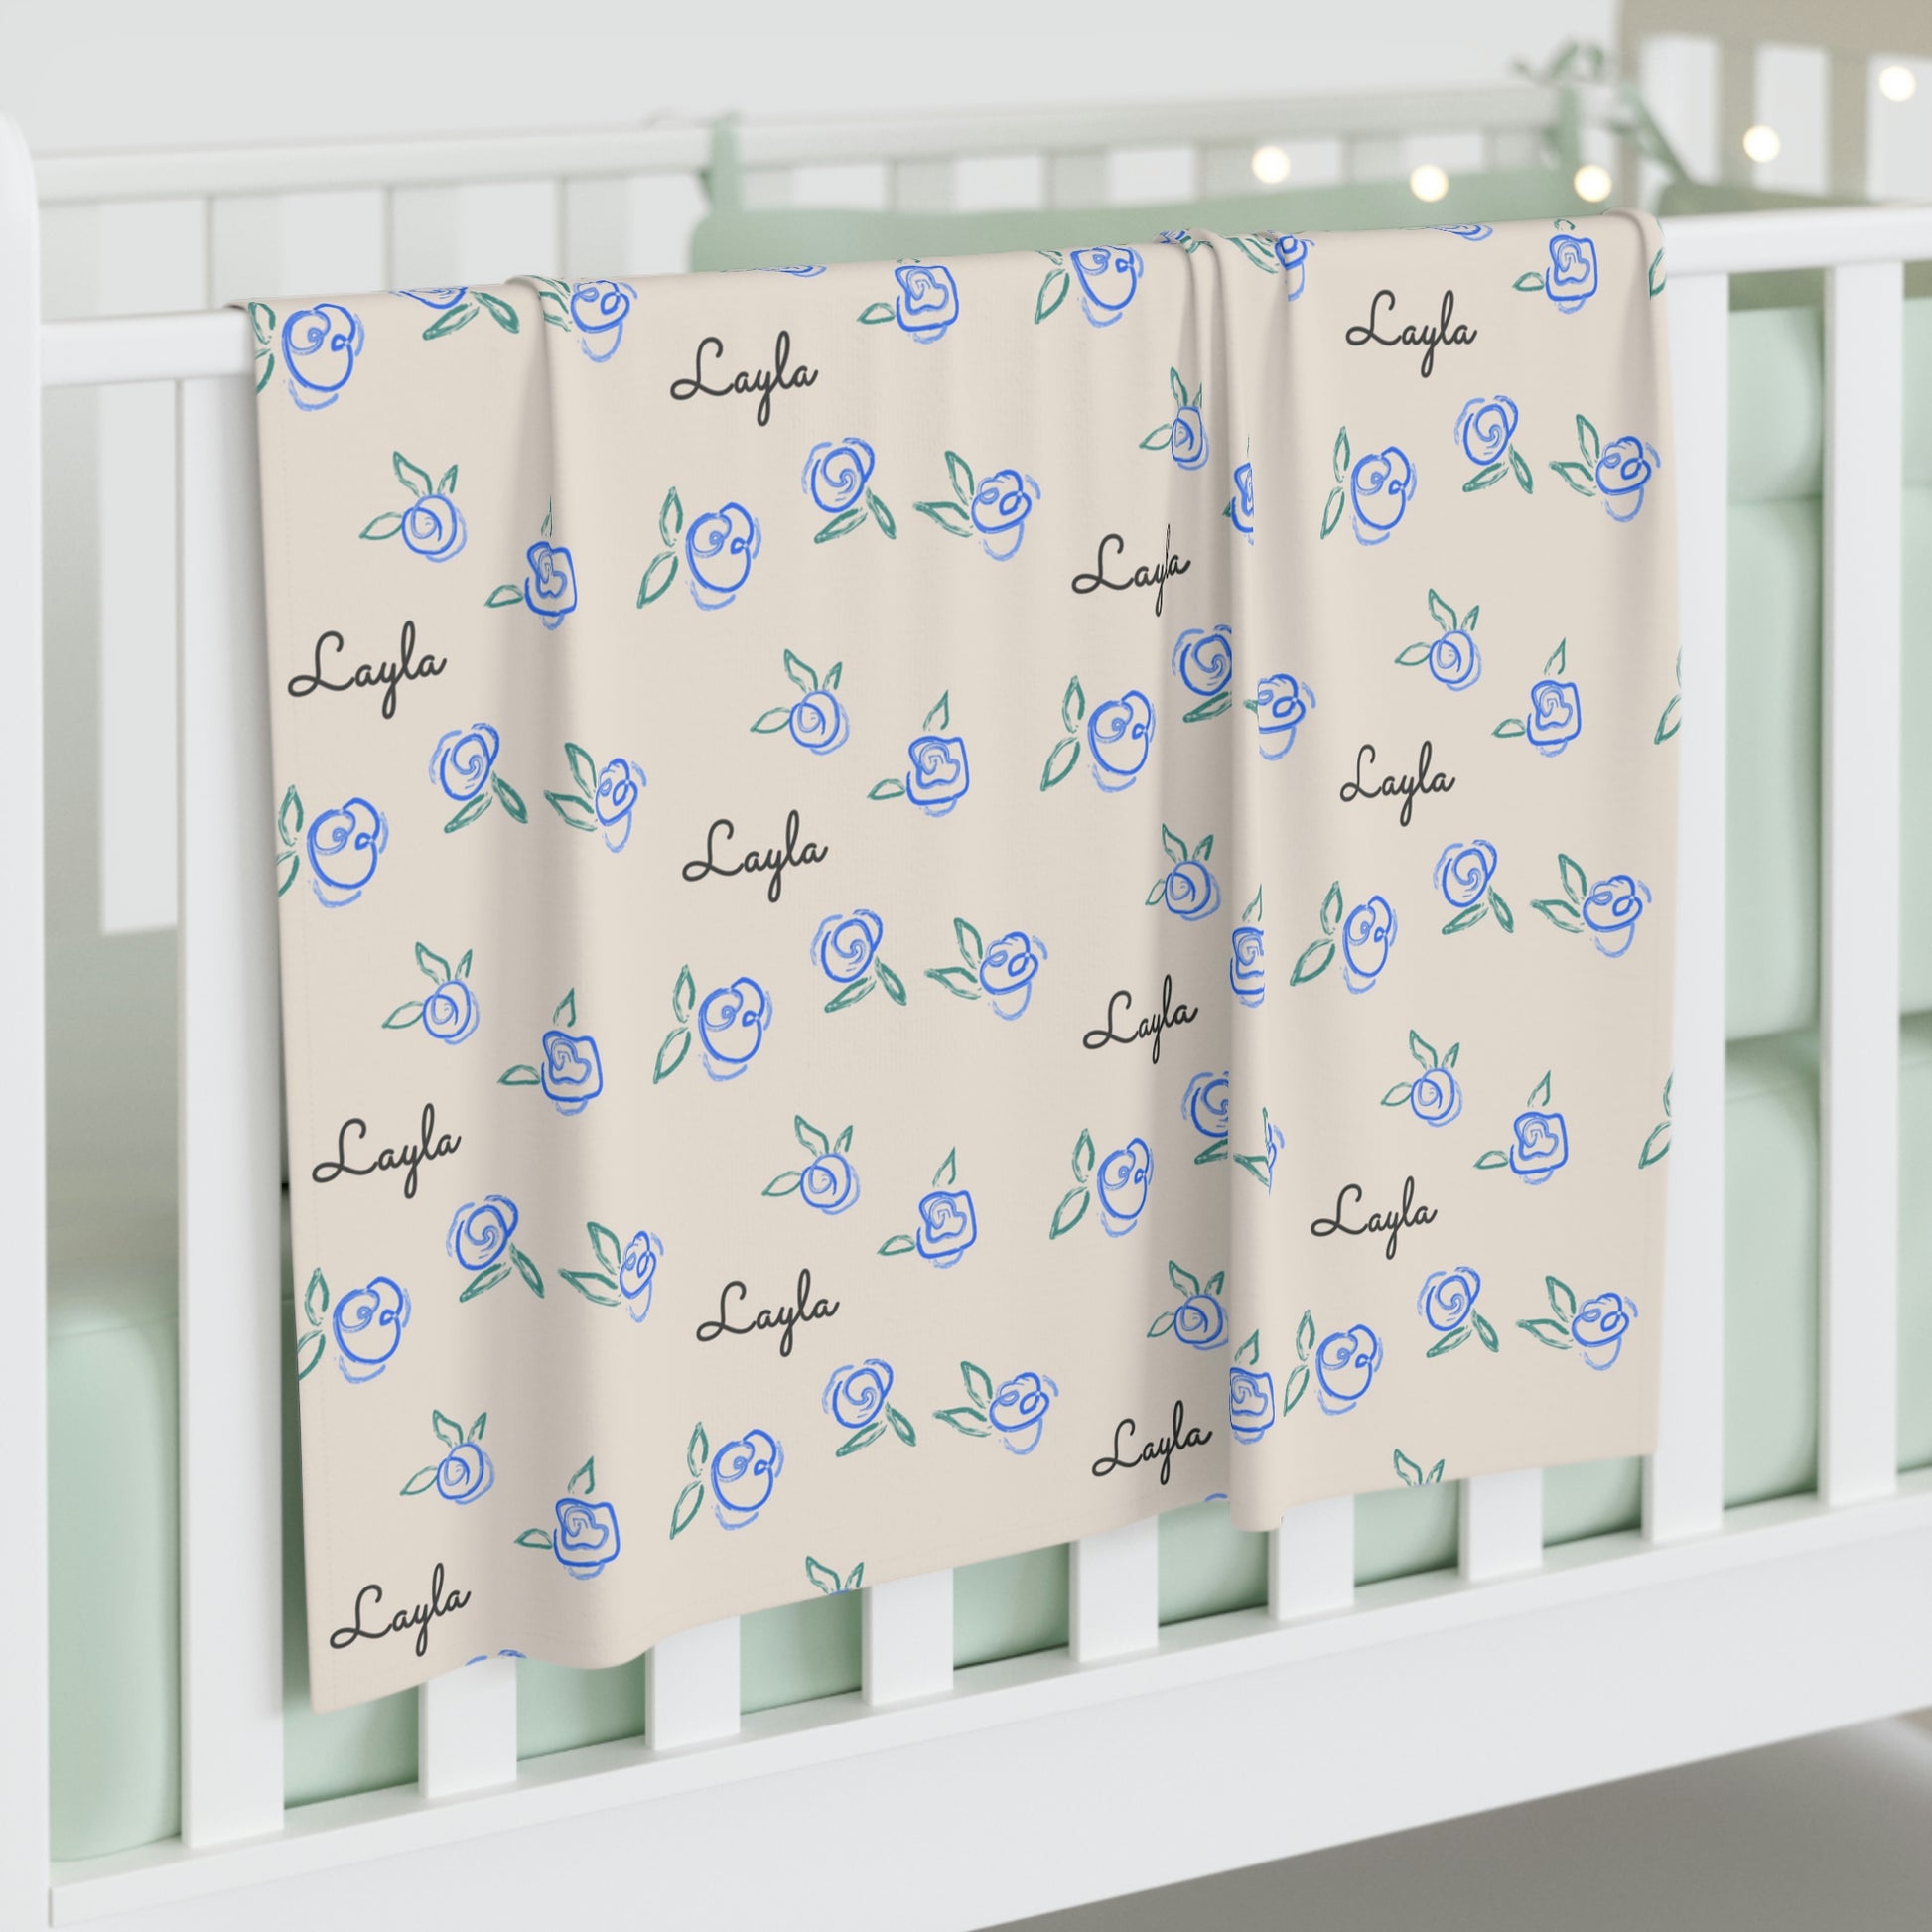 Jersey personalized baby blanket in blue rose pattern hung over side of white crib